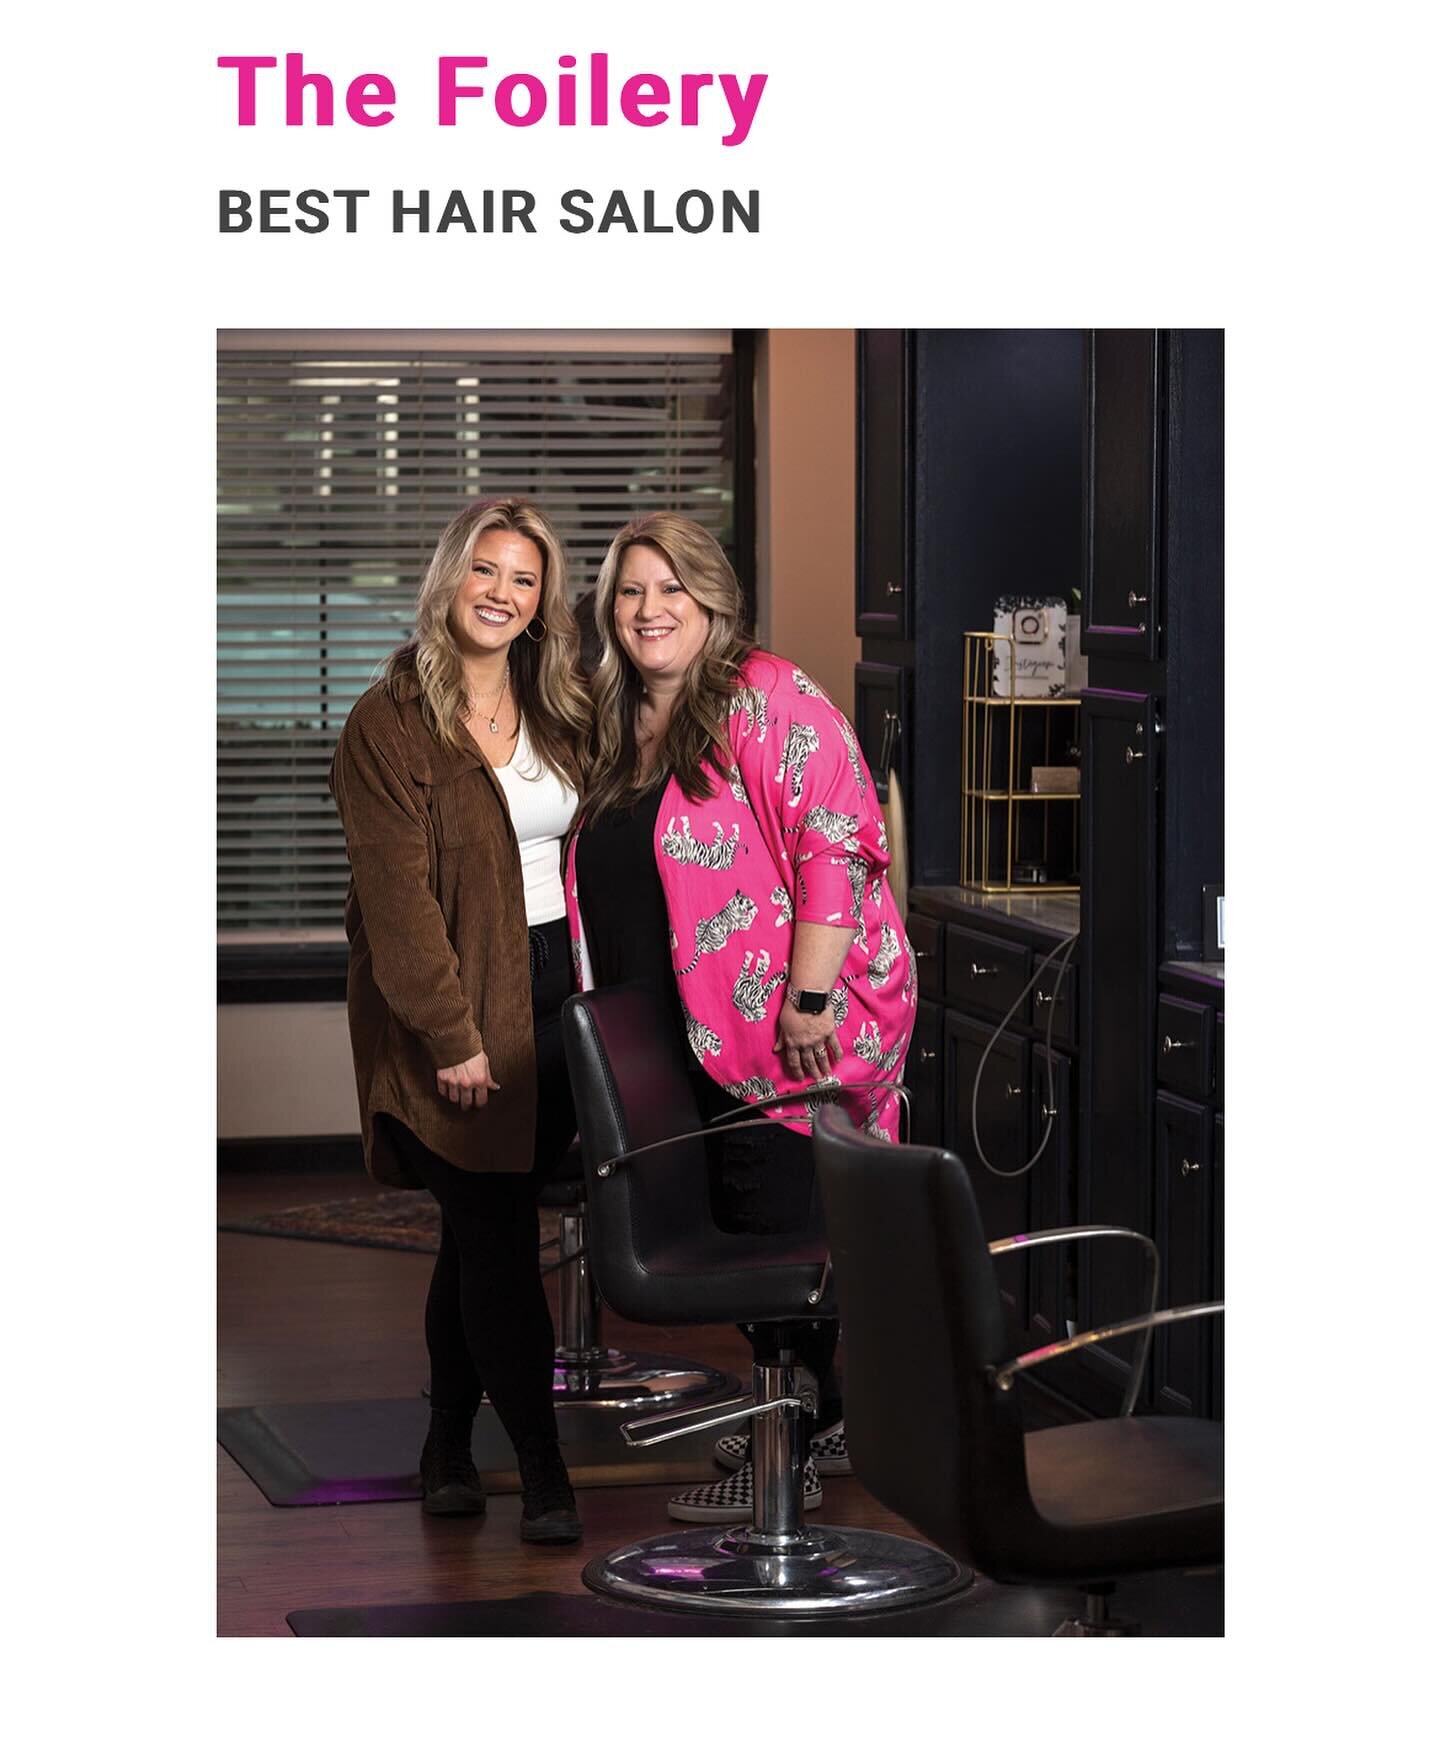 ✨The 2024 Maggie Award results are in! 
 ✅ Best Hair Salon
We are so thankful to have such an amazing team of stylists in our salon.  Thank you to everyone who voted to make this happen. 
.
.
. #thefoilery  #maggieawards2024 #bestsalon #wehavethebest